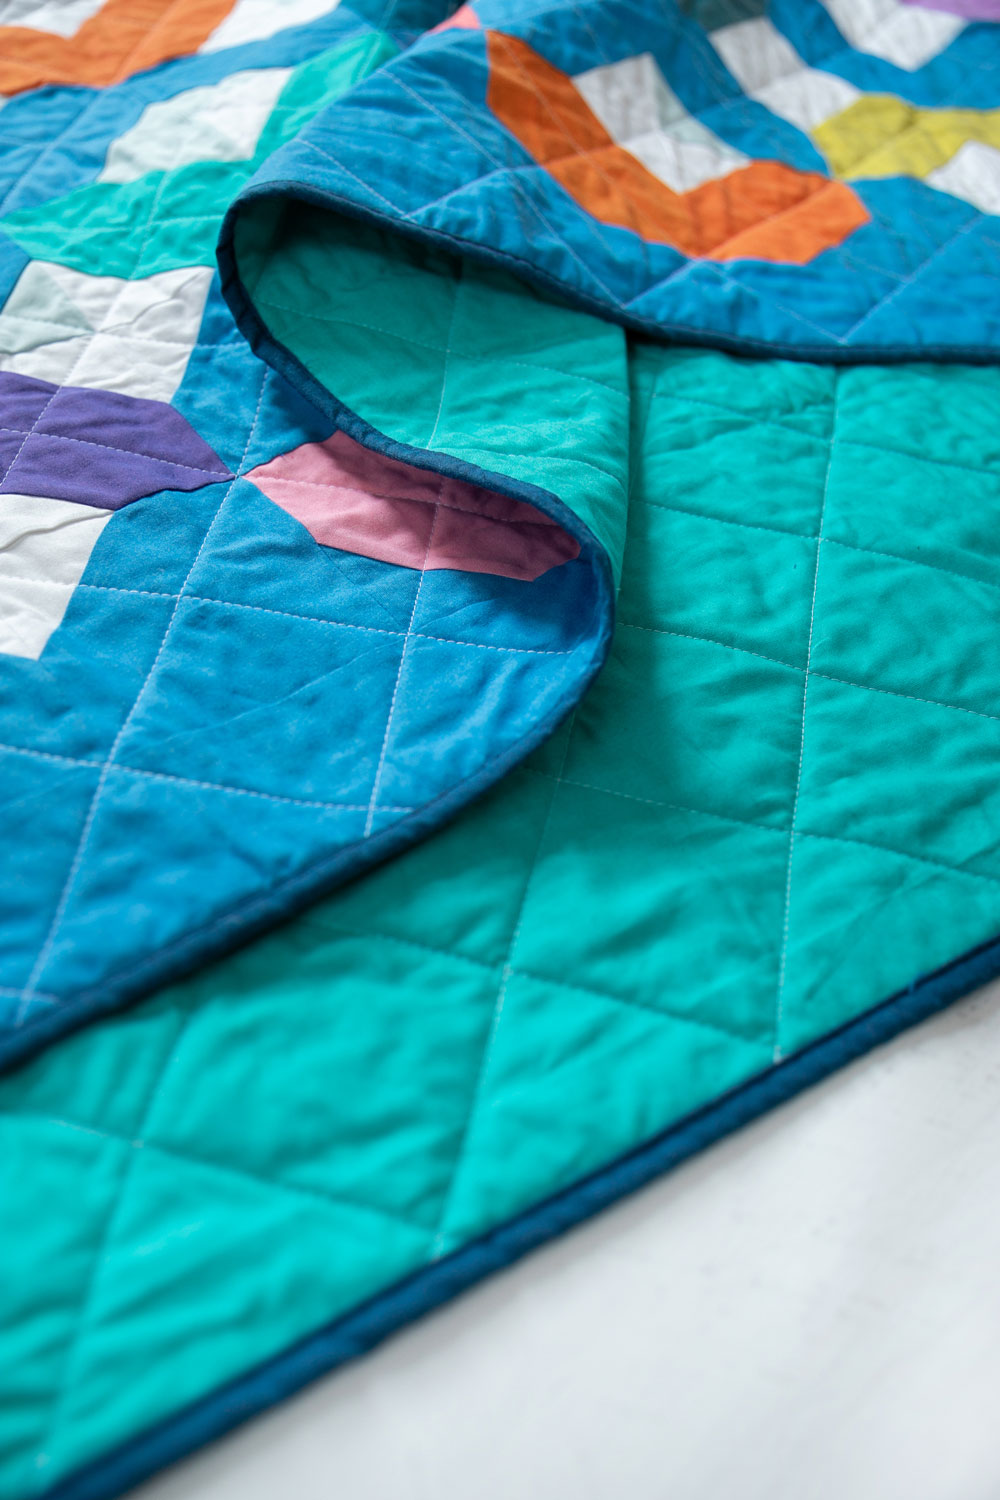 Make a Rainbow Quilt using this simple alteration to the Glitter & Glow quilt pattern. This is fat quarter friendly and great for newbie quilters and beginners. suzyquilts.com #rainbowquilt #shotcotton